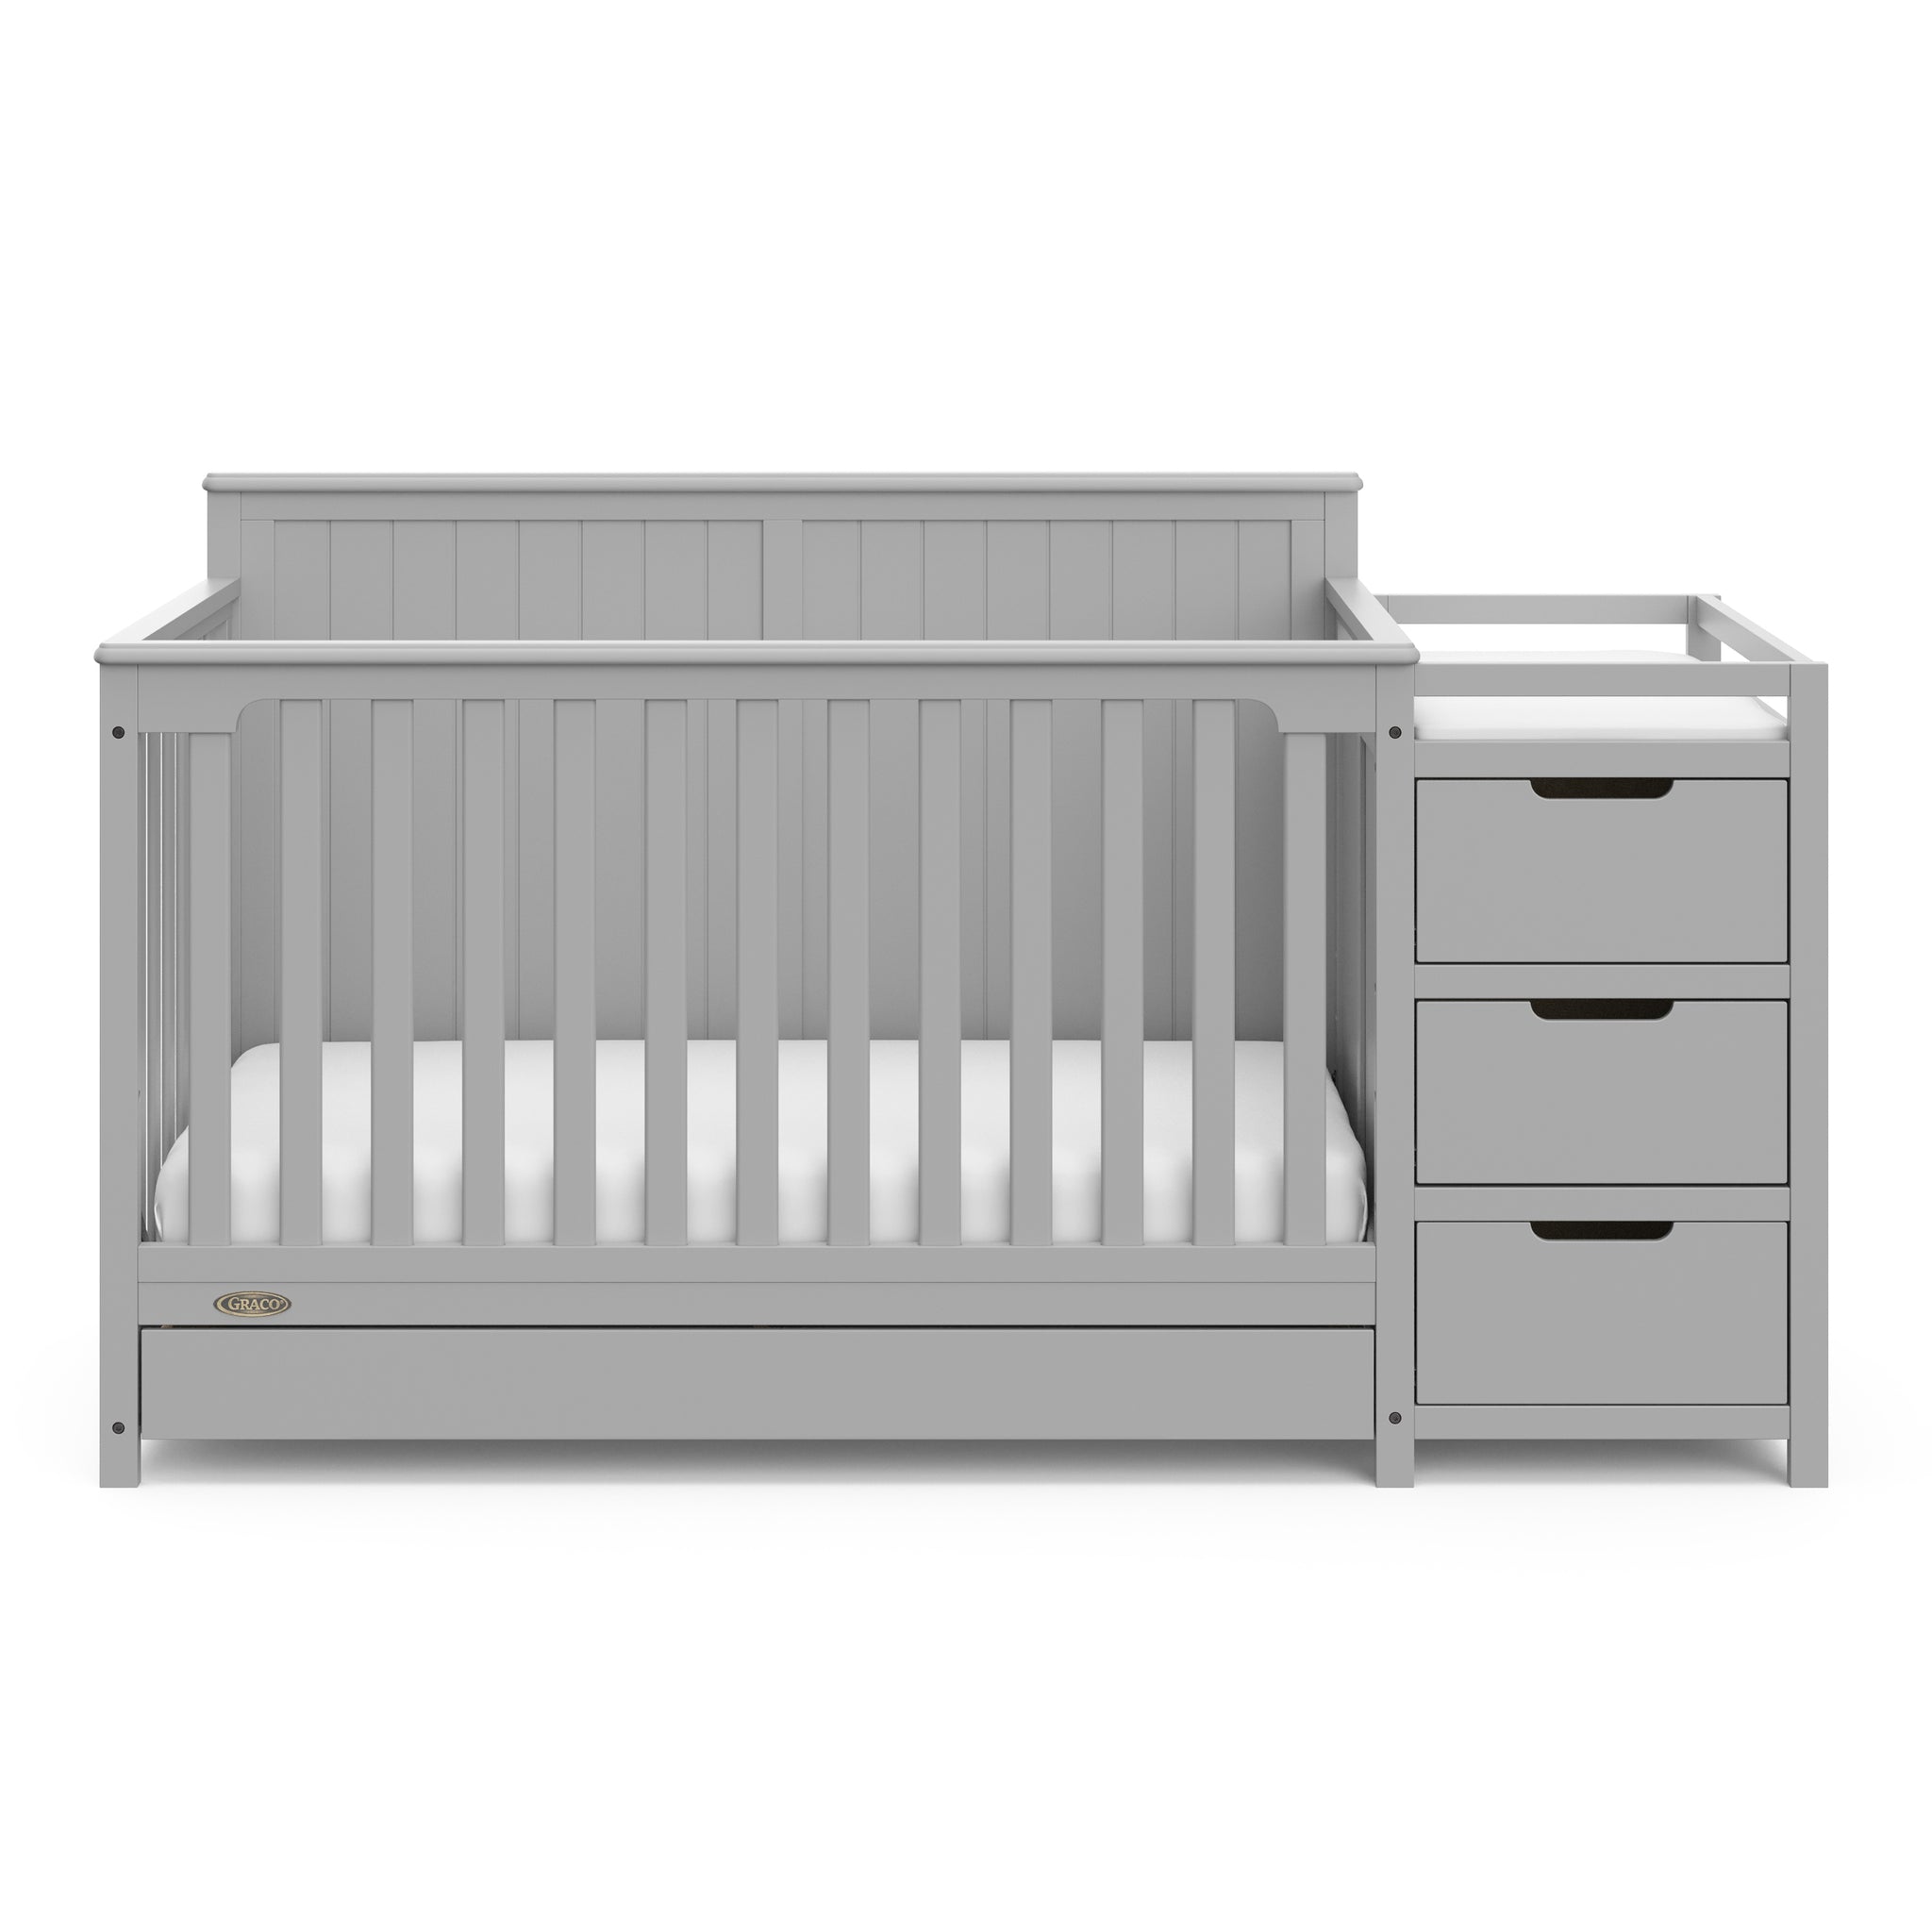 Front view of Pebble gray crib with drawer and changer with drawer